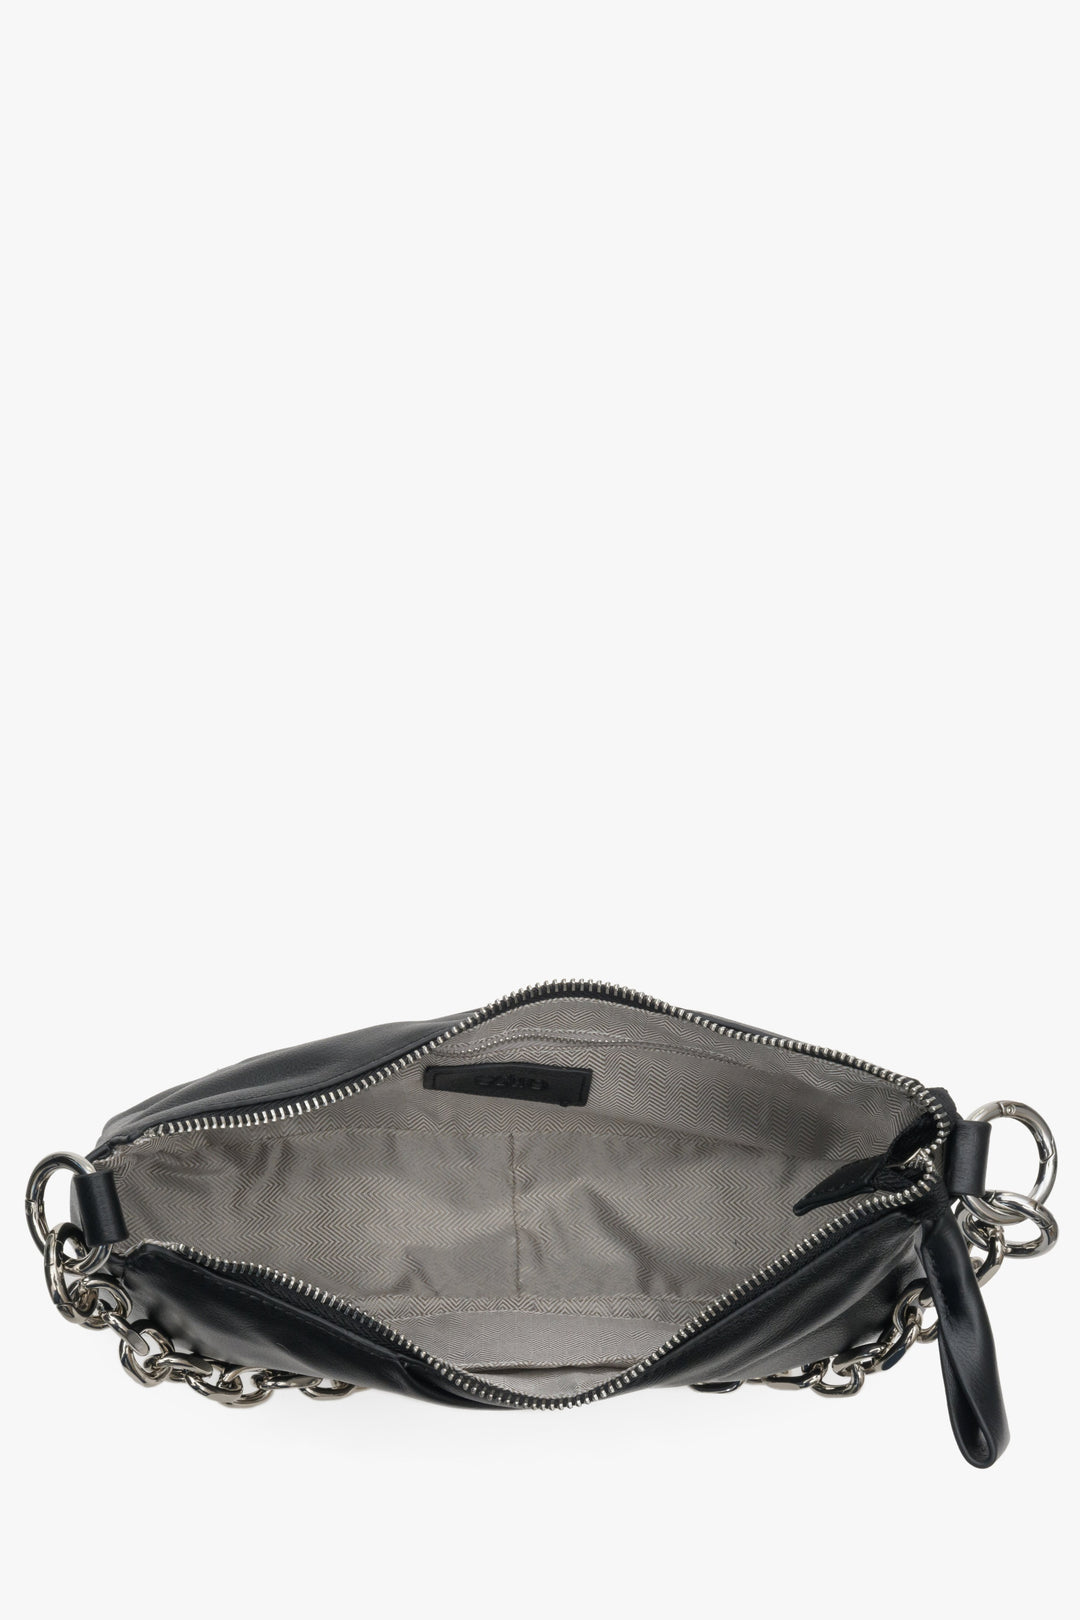 Small, convenient women's black shoulder bag made of genuine leather by Estro - close-up of the interior of the model.